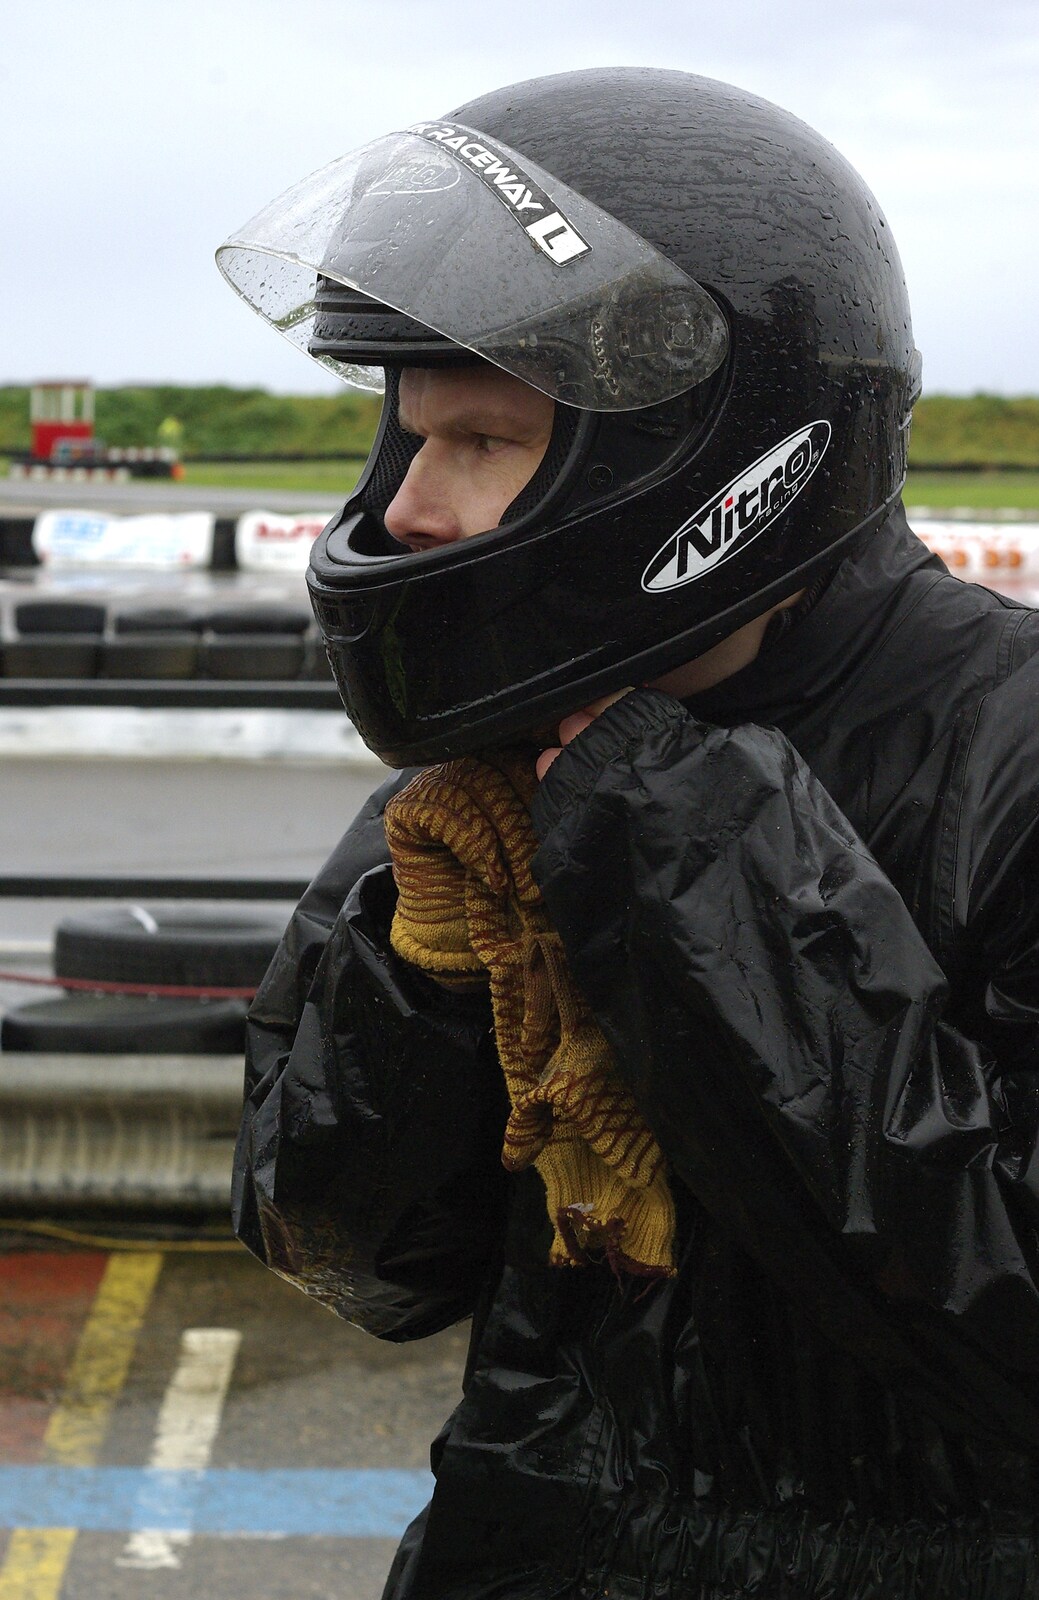 Gov's Stag-Day Karting, Ellough Airfield, Beccles, Suffolk - 19th January 2008: Bill zips up his boiler suit